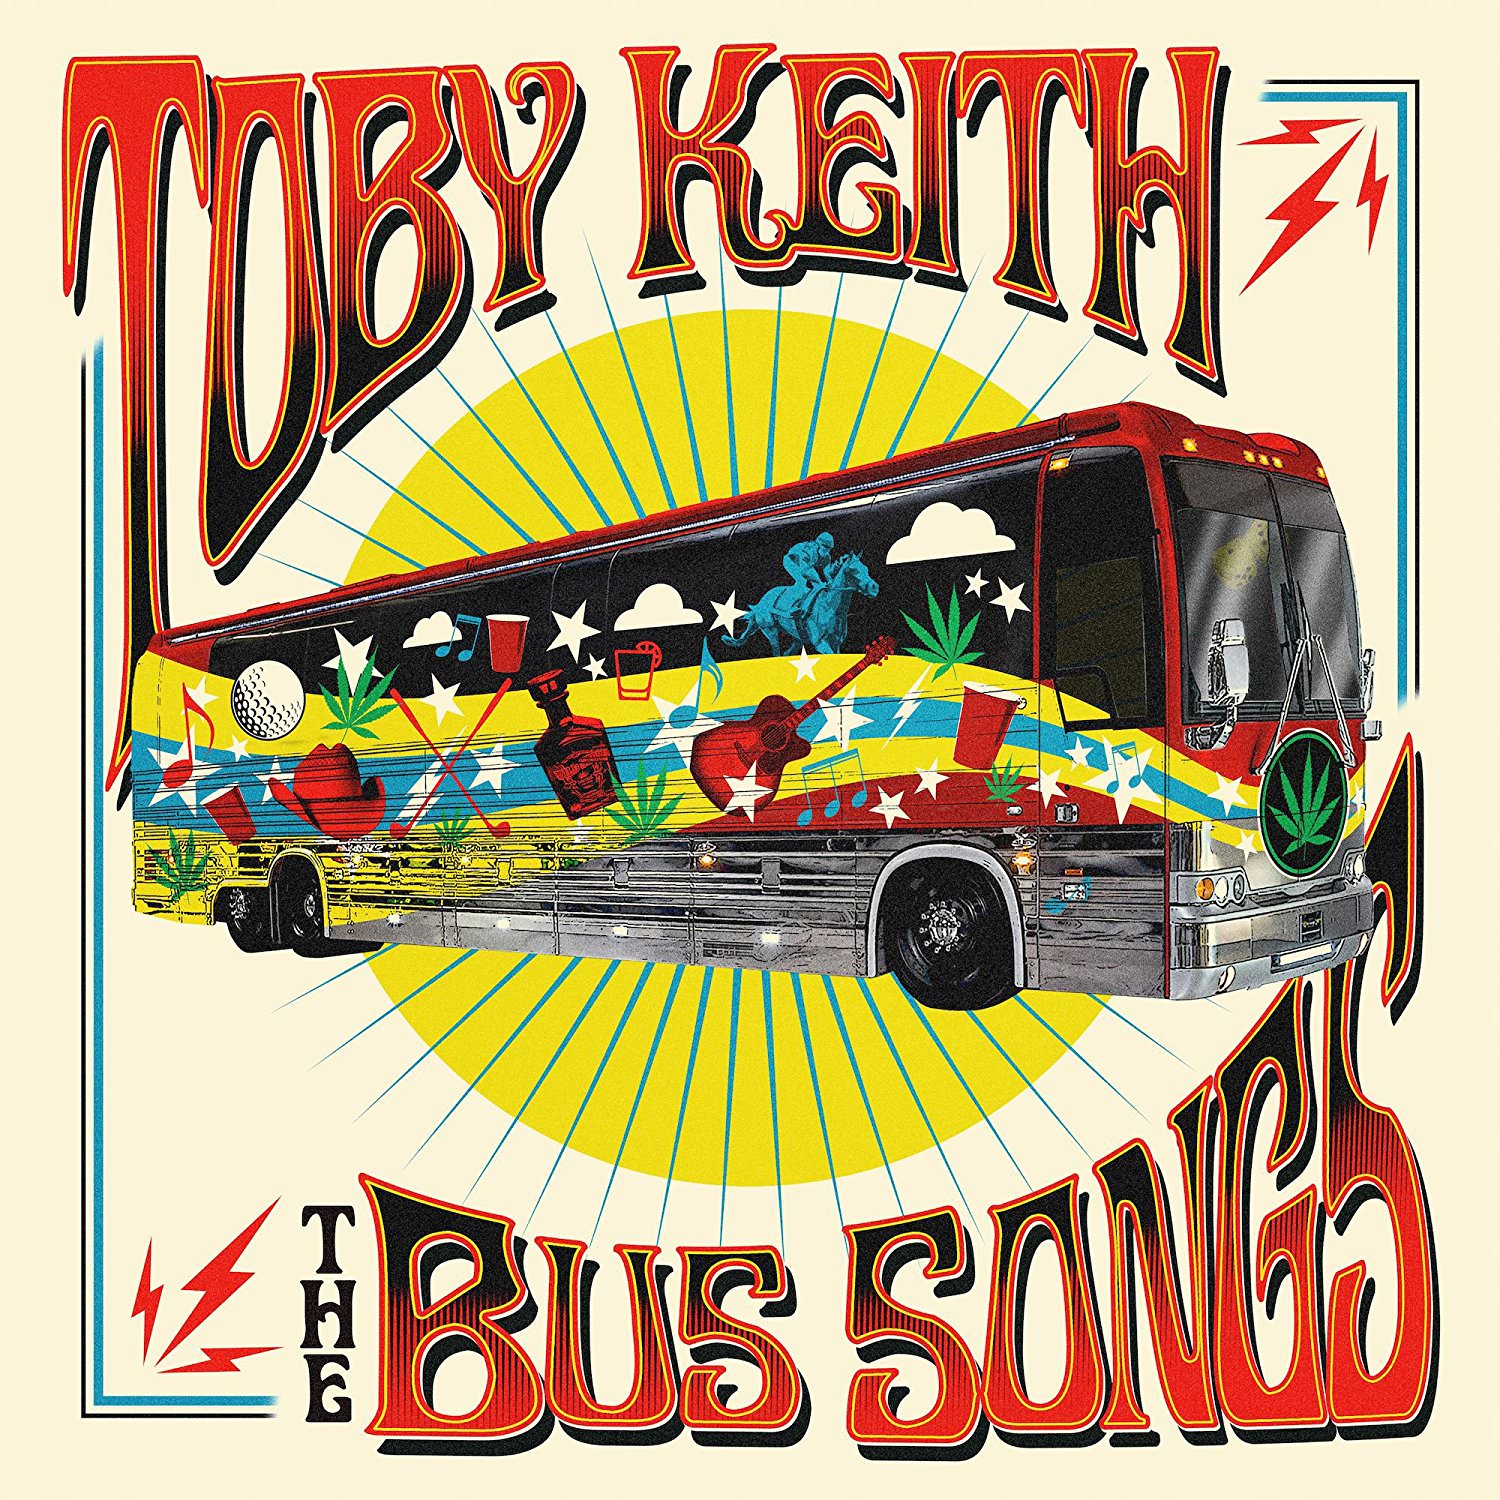 Toby Keith - The Bus Songs (2017) [ProStudioMasters FLAC 24bit/44,1kHz]